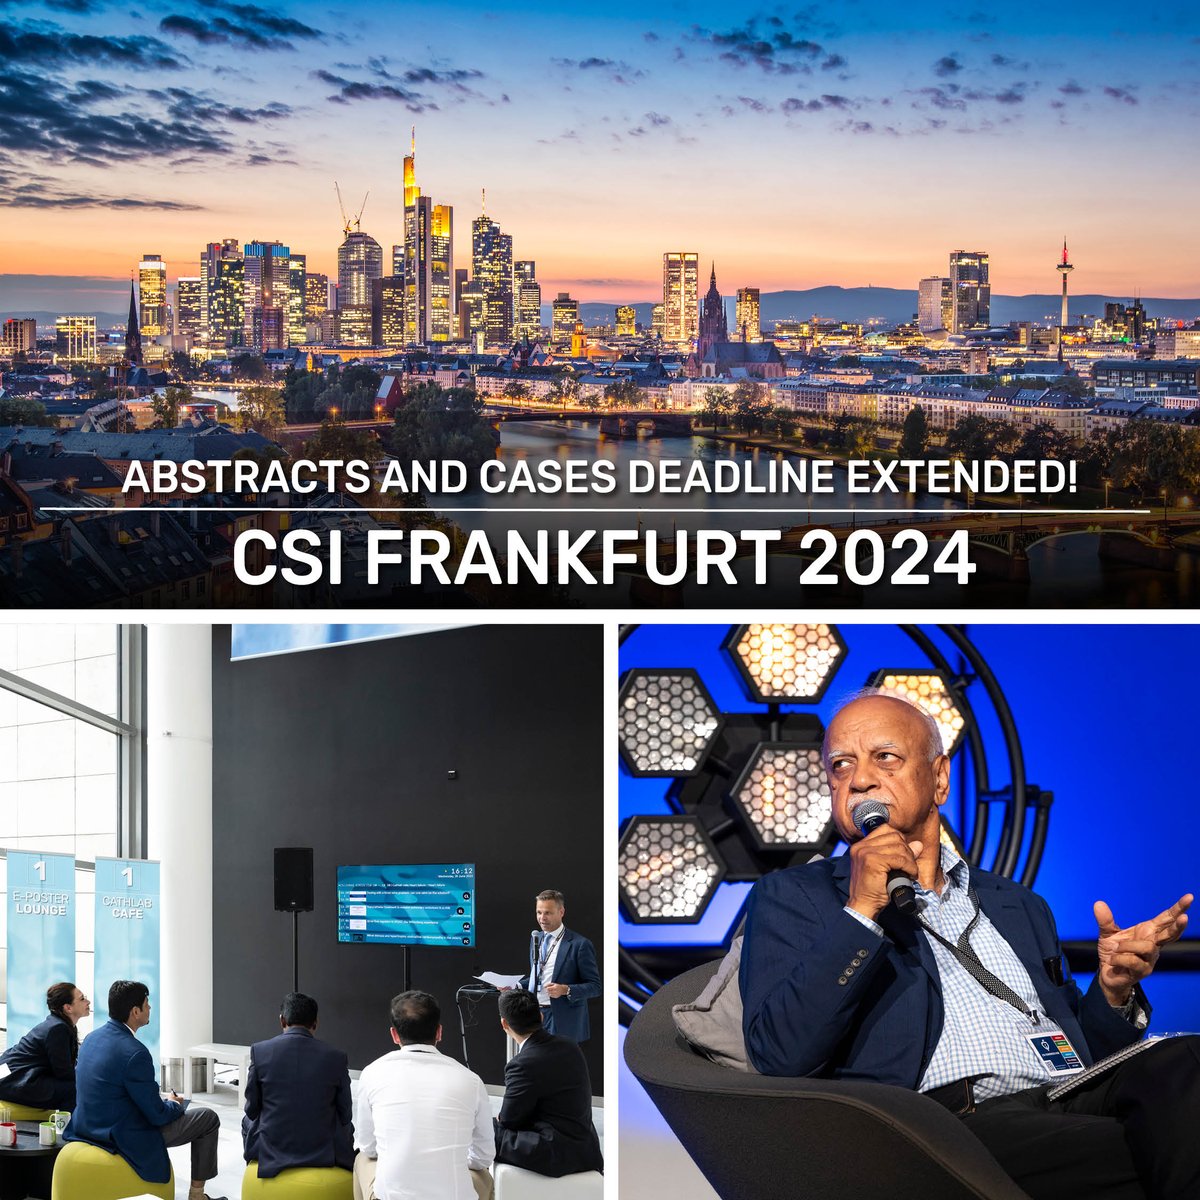 Great news - the submission deadline for abstracts and cases has been postponed! Get a chance to win €5000 prize & contribute to the program of #CSIFrankfurt New deadline: March 22, 2024 Submit here: lnkd.in/ehiiCdy3 #CSIFrankfurt #CSIConference #CSI #Cardiology